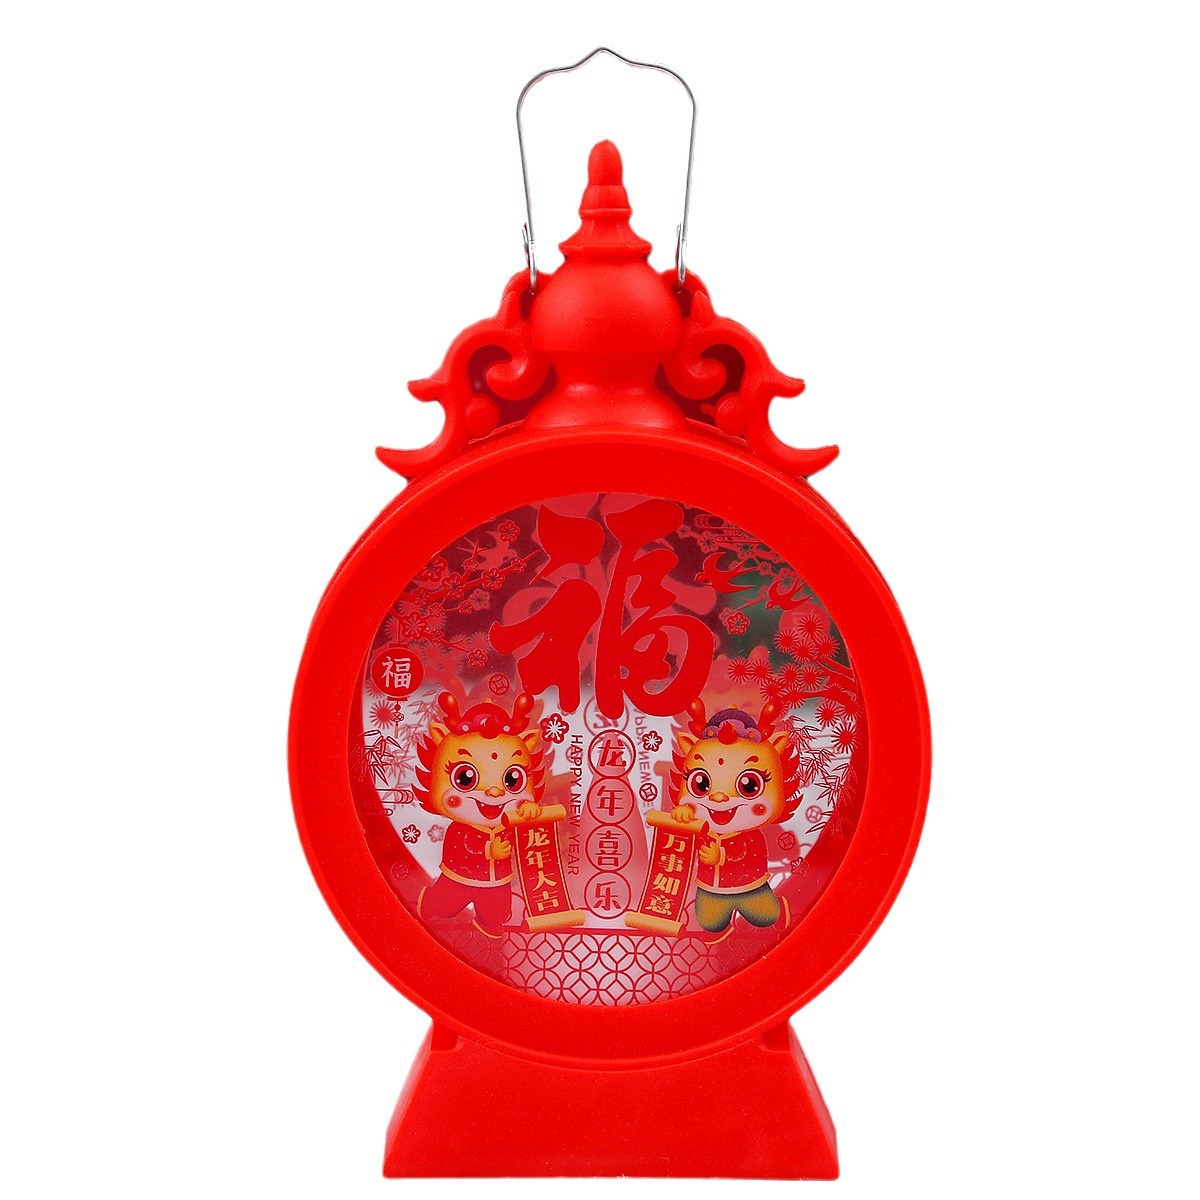 New Year Decoration Storm Lantern Dragon Year Spring Festival Lantern Festival Portable Small Bell Pepper Led Electronic Candle Children's New Year Gift